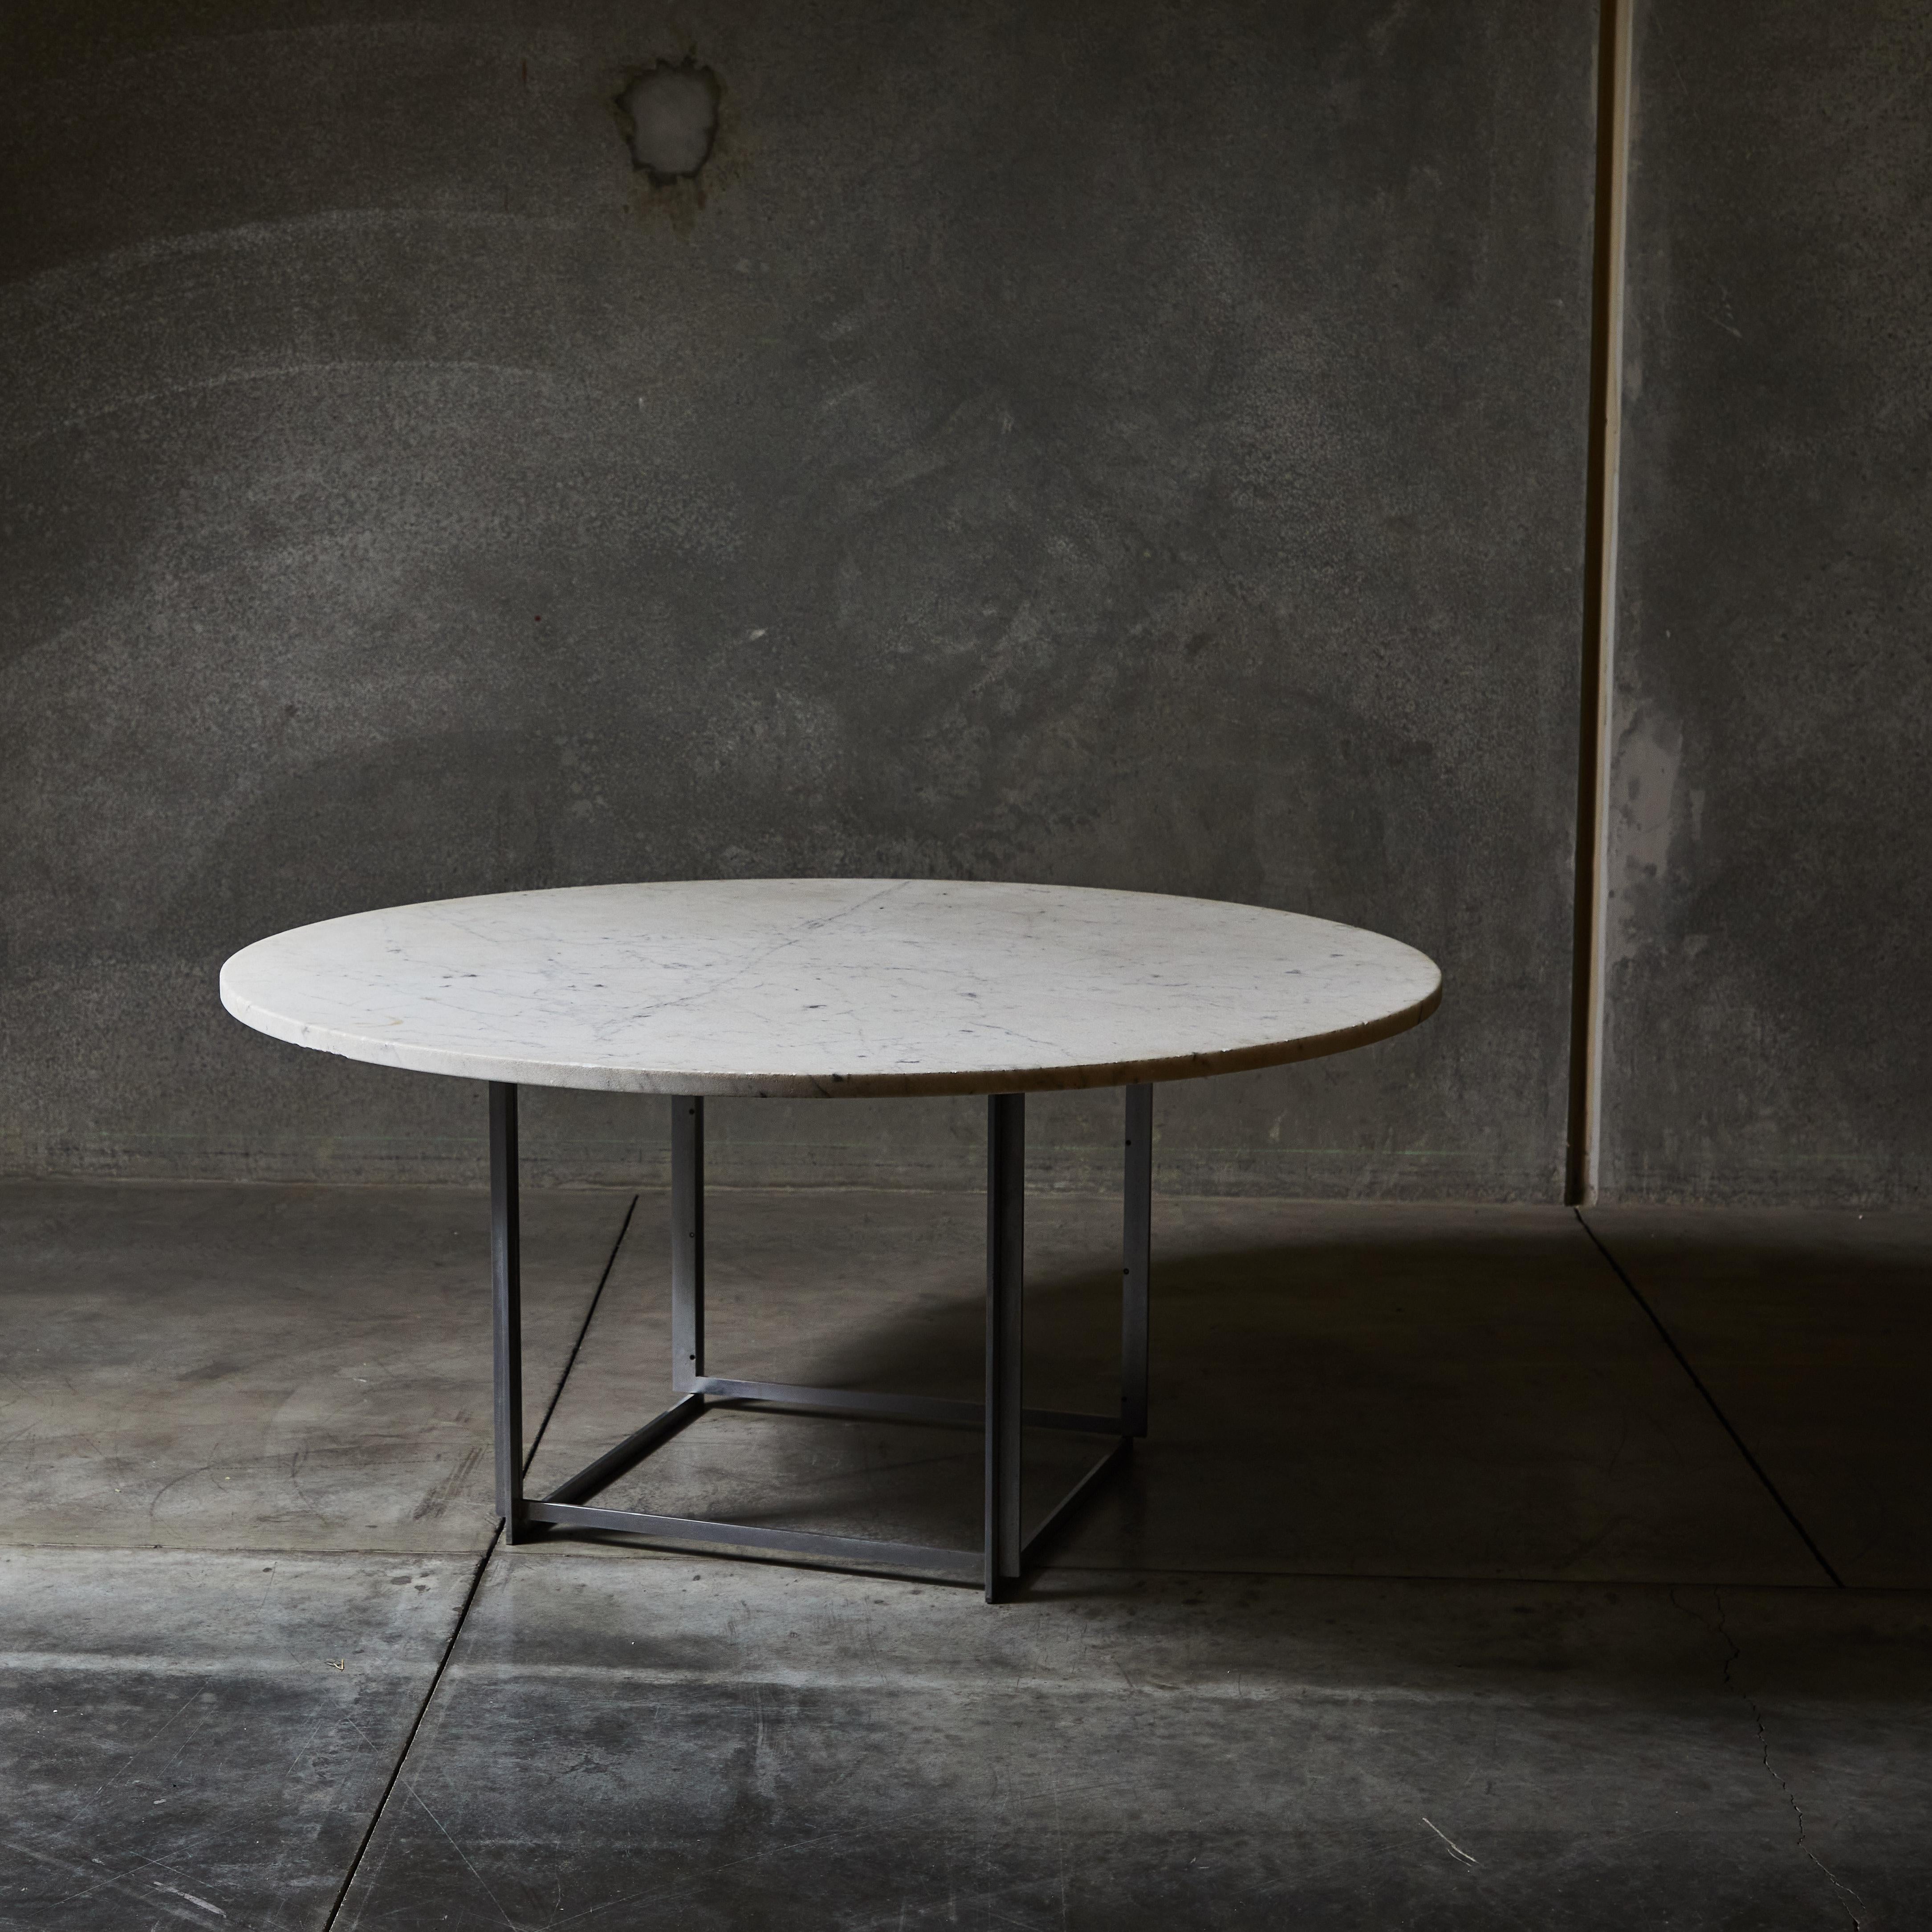 PK54 marble and steel dining table by Poul Kjærholm. Produced by E. Kold Christensen. Made in Denmark, circa 1963.

Materials: flint-rolled Italian marble and matte chrome-plated steel.

Literature: The Furniture of Poul Kjaerholm: Catalogue